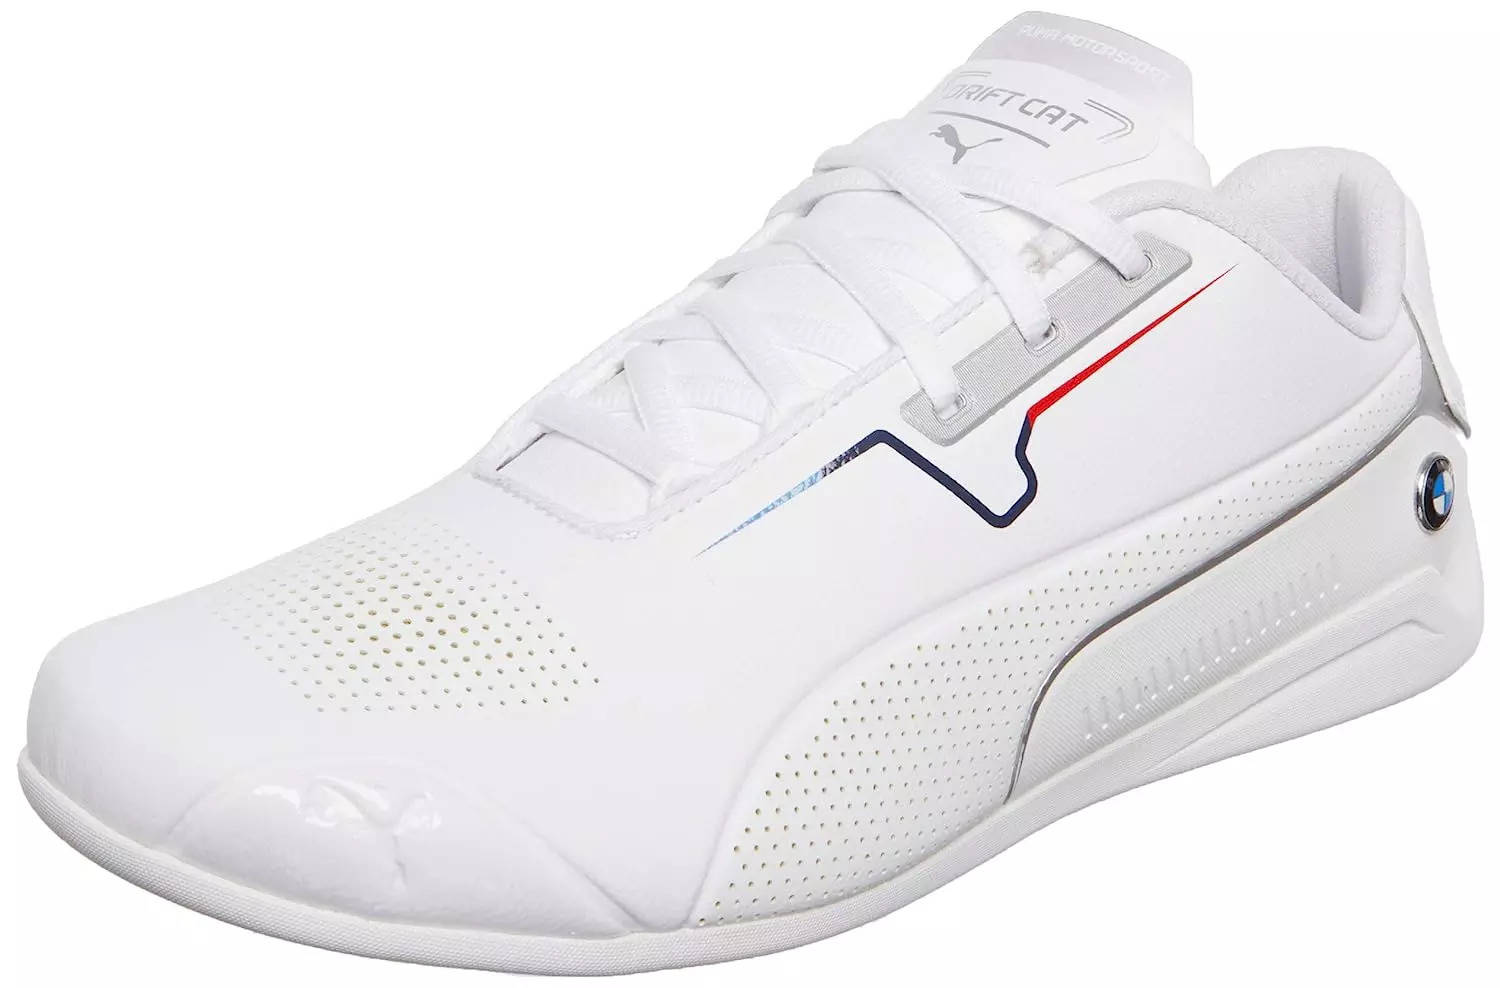 19% OFF on Puma White Synthetic Leather Velcro Sneaker Shoes on Snapdeal |  PaisaWapas.com